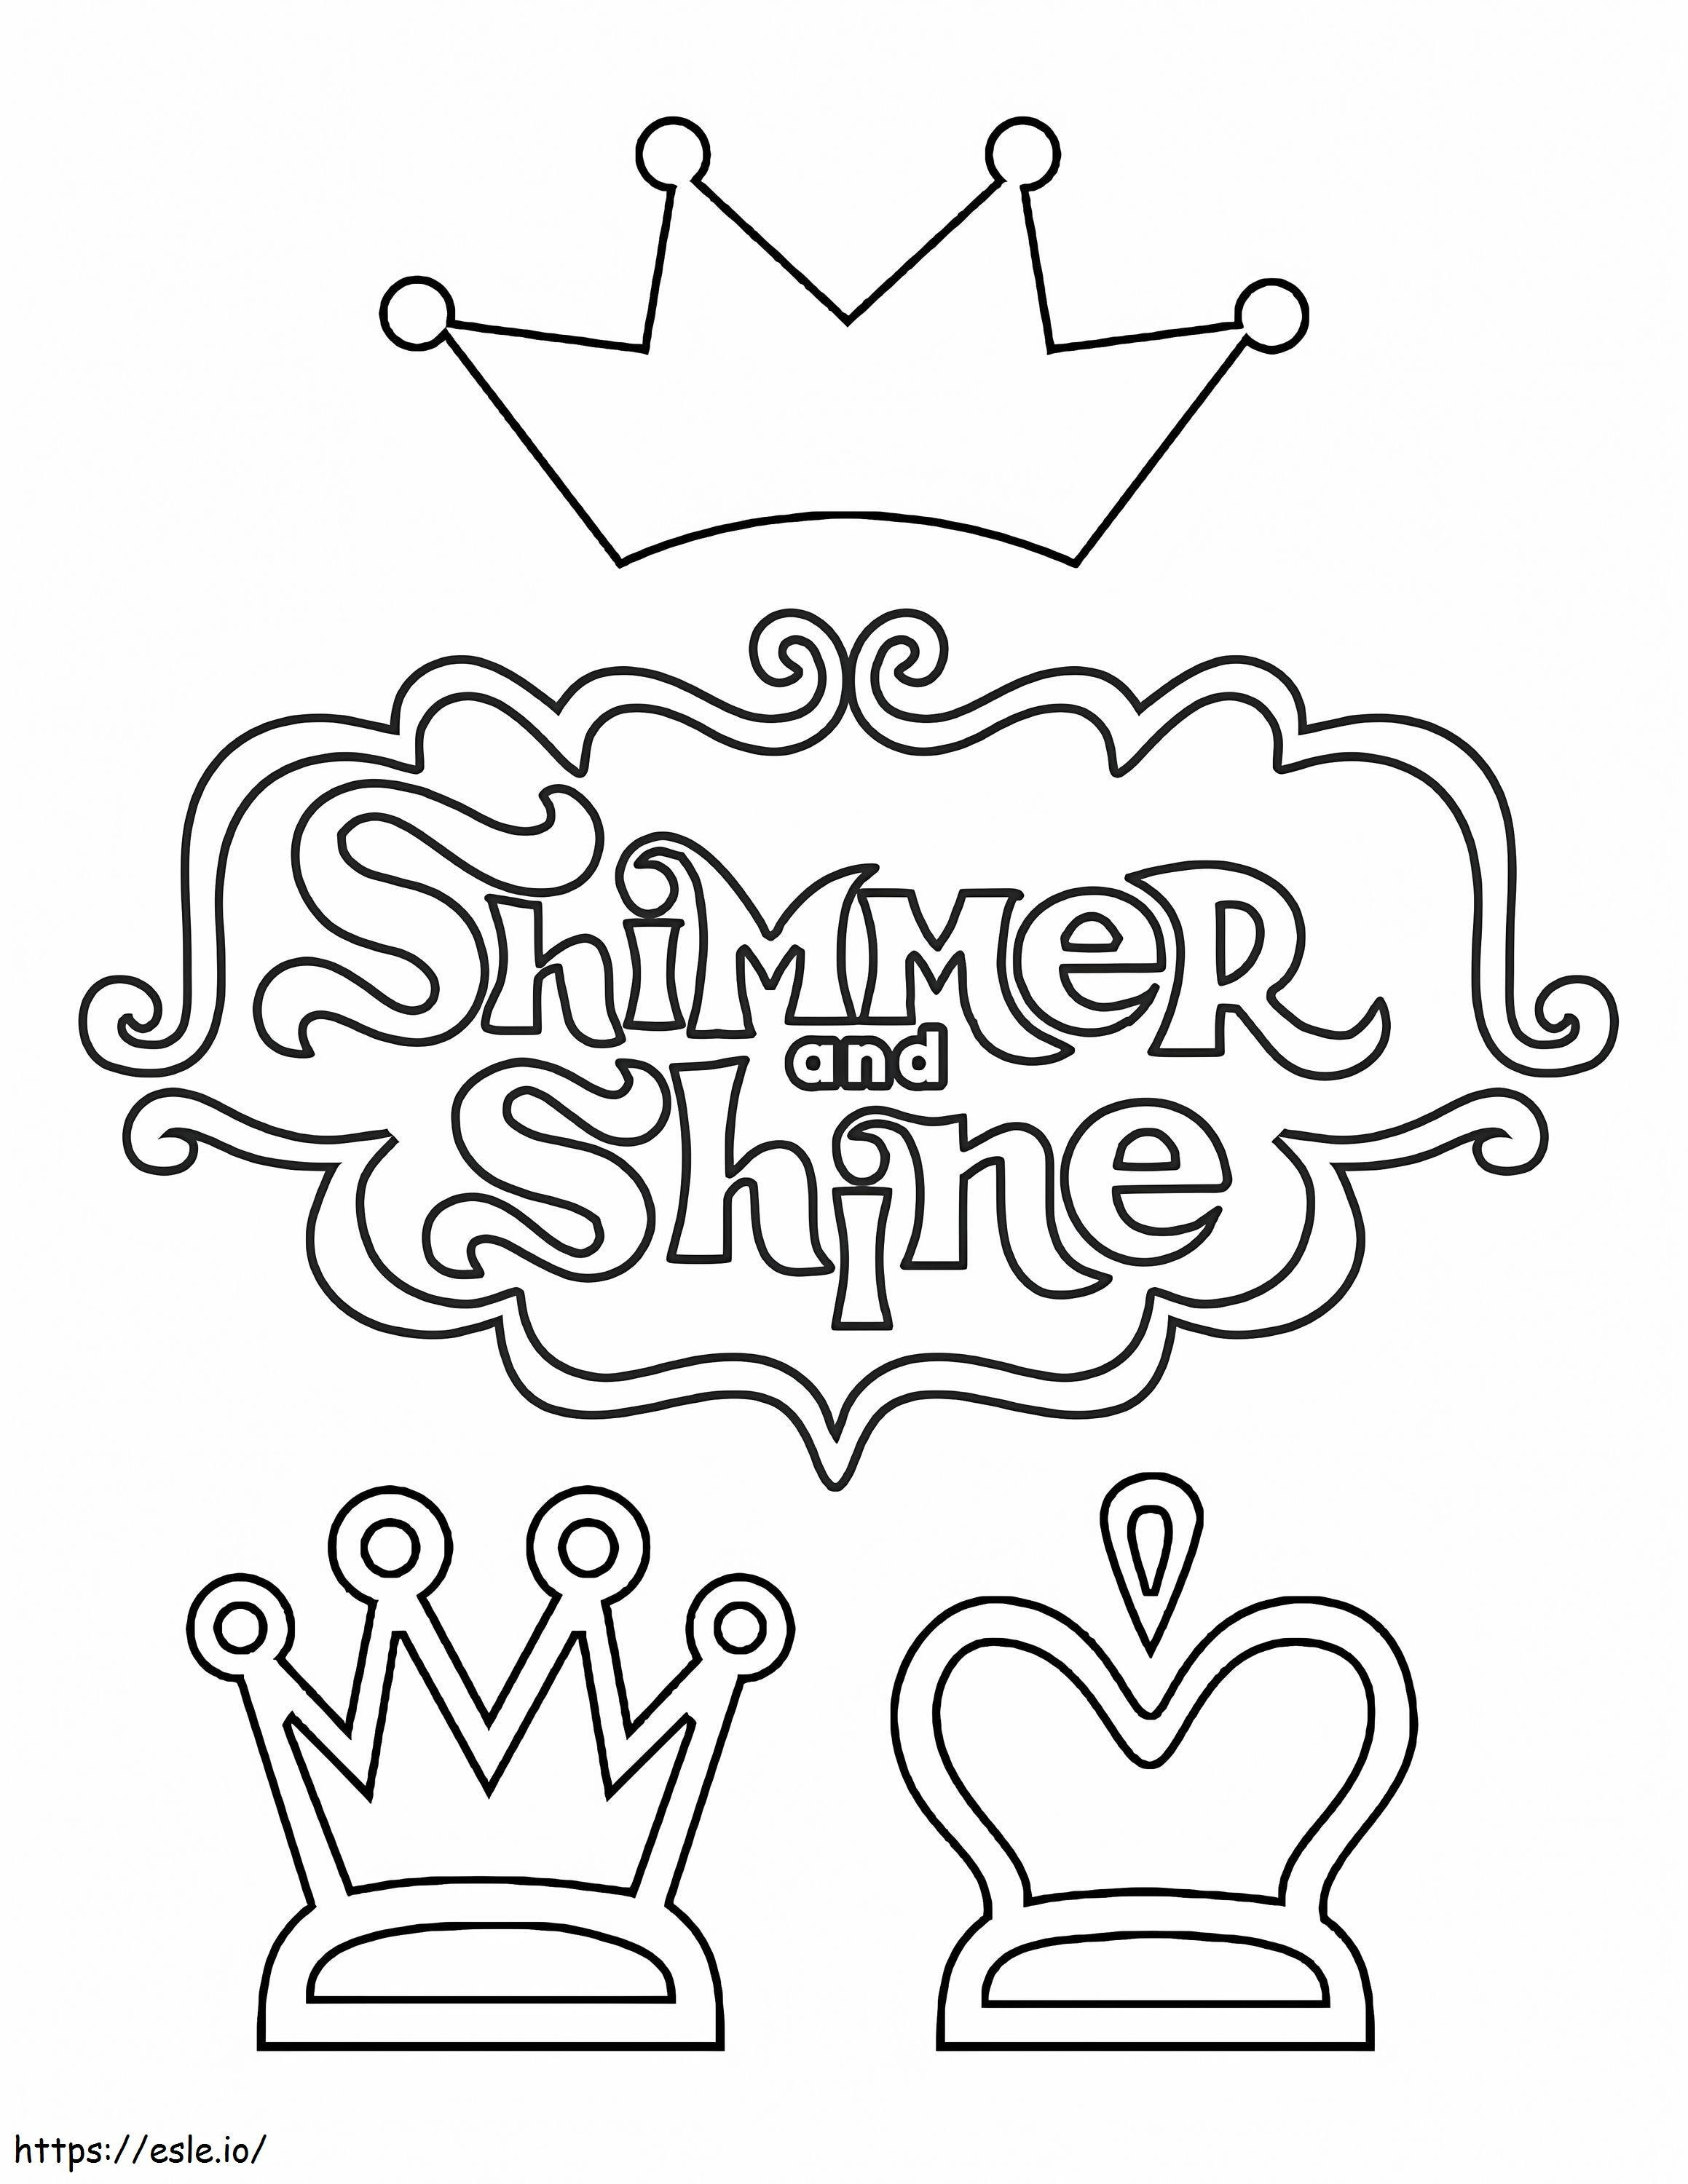 1571627308 Shimmer And Shine Logo coloring page